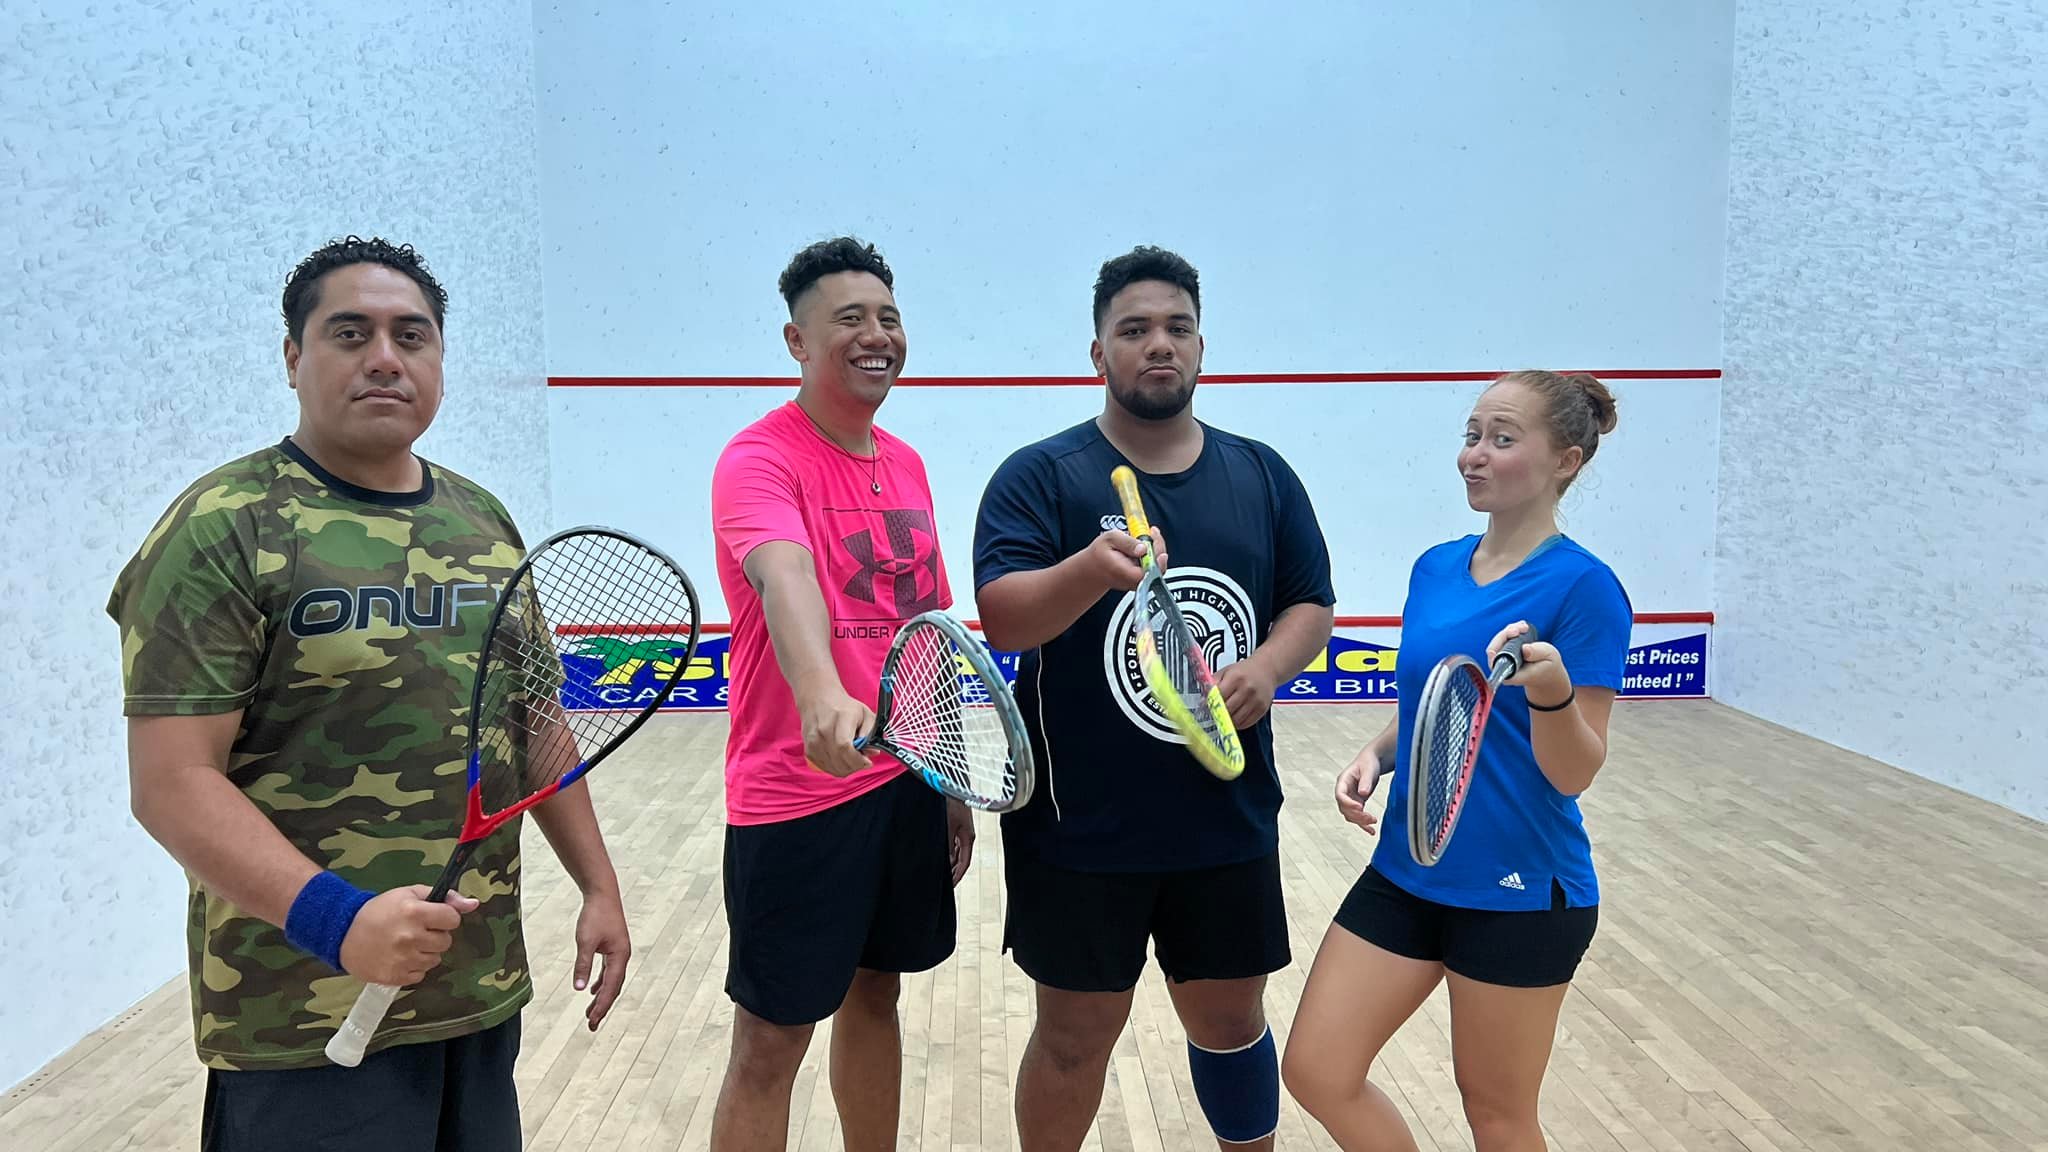 Bank of high energy anticipated at BSP squash tournament